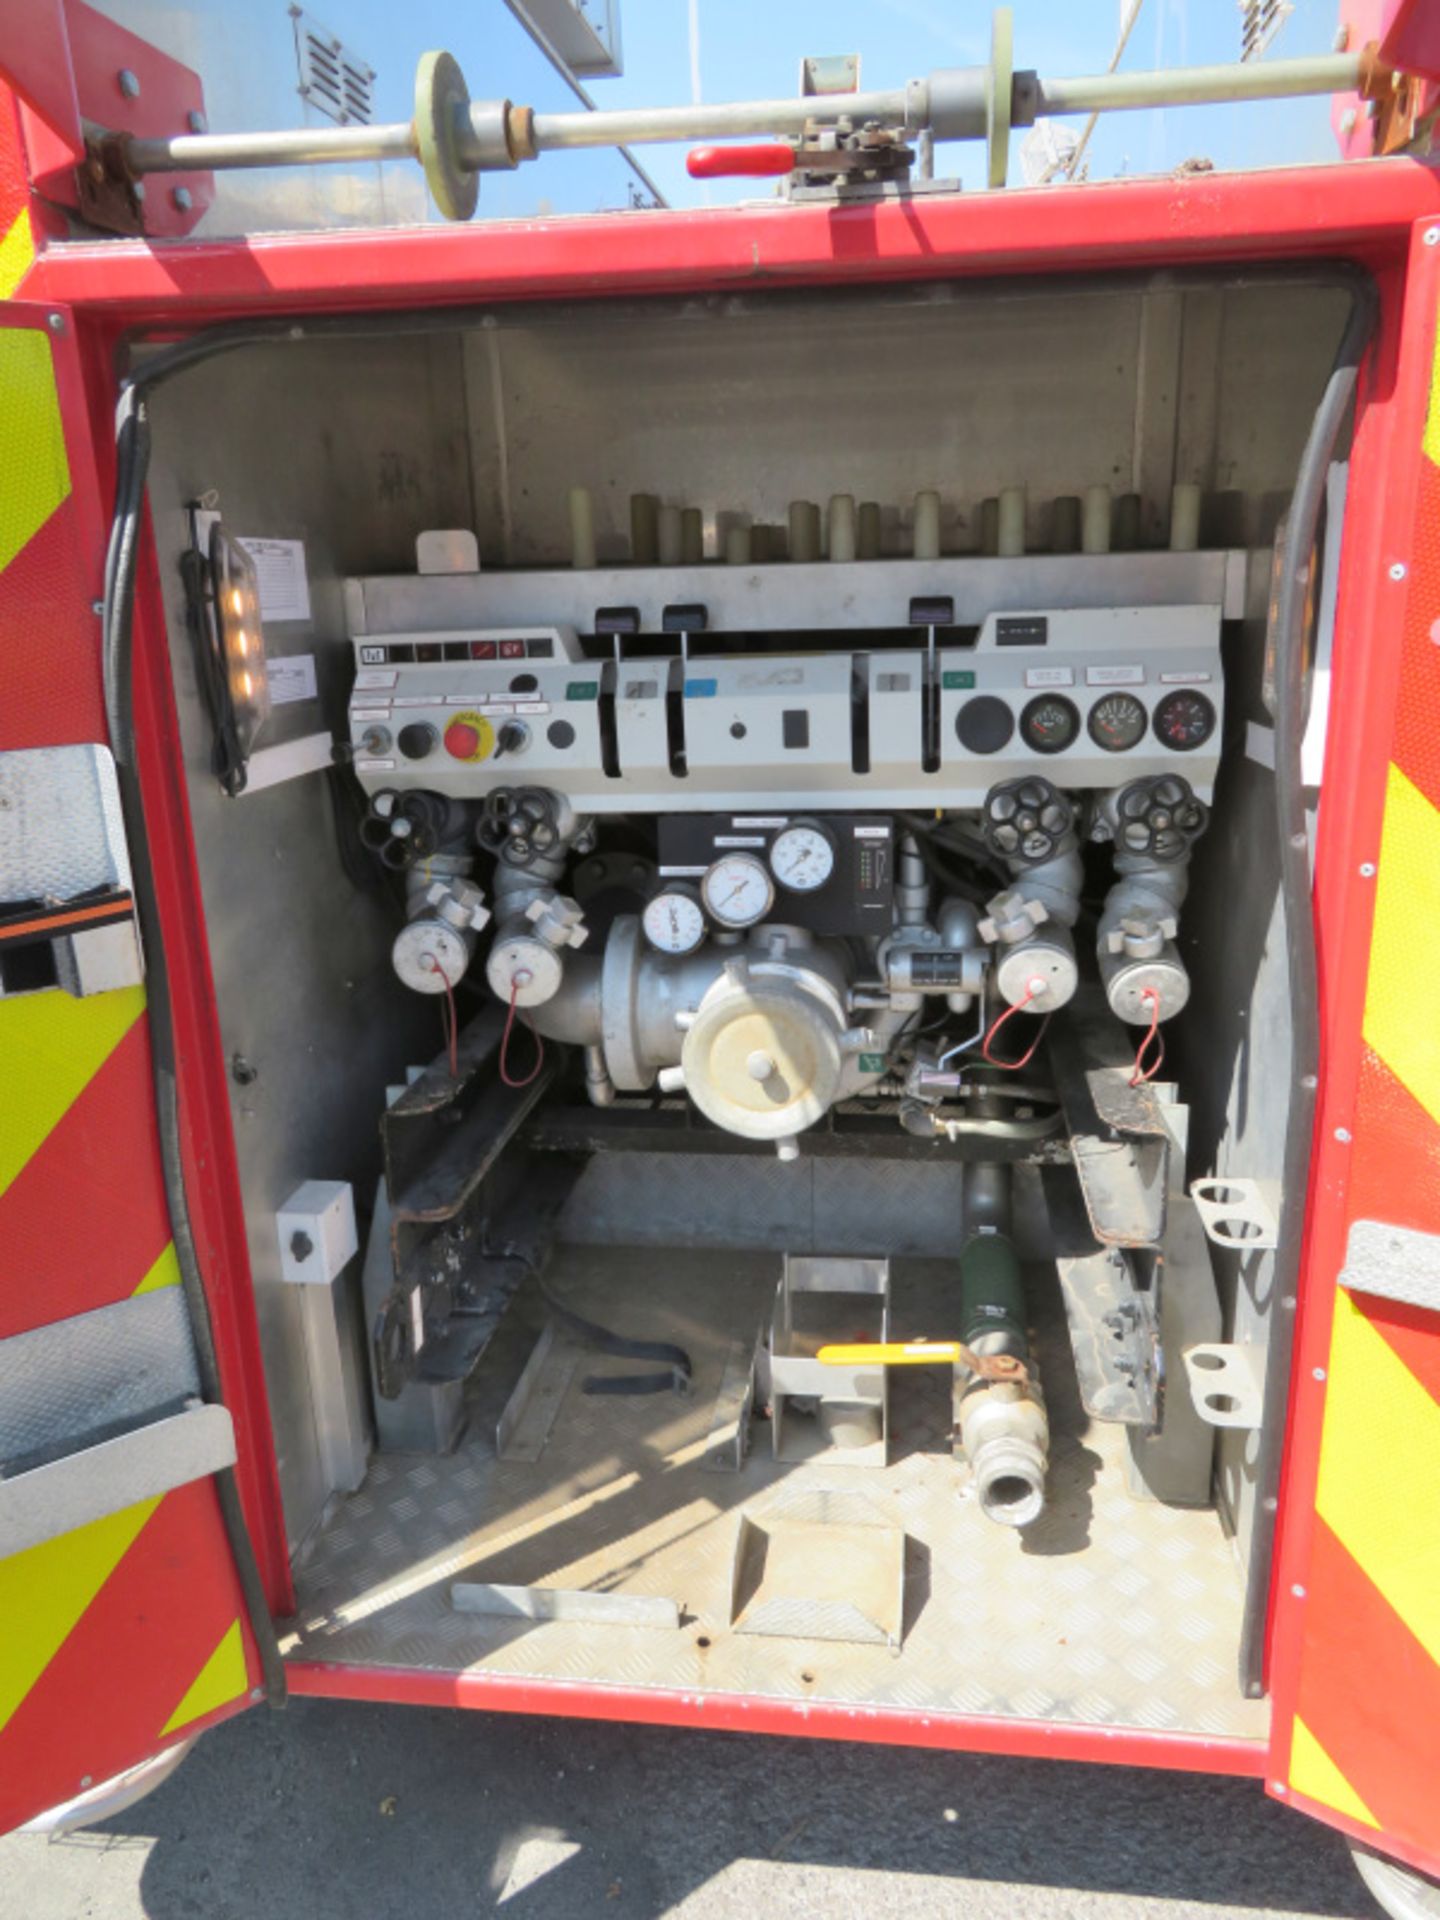 Man Angloco Fire Engine - LE15.220 - 52788 miles - winch - Unit been used 713hr - 6871CC - Image 33 of 35